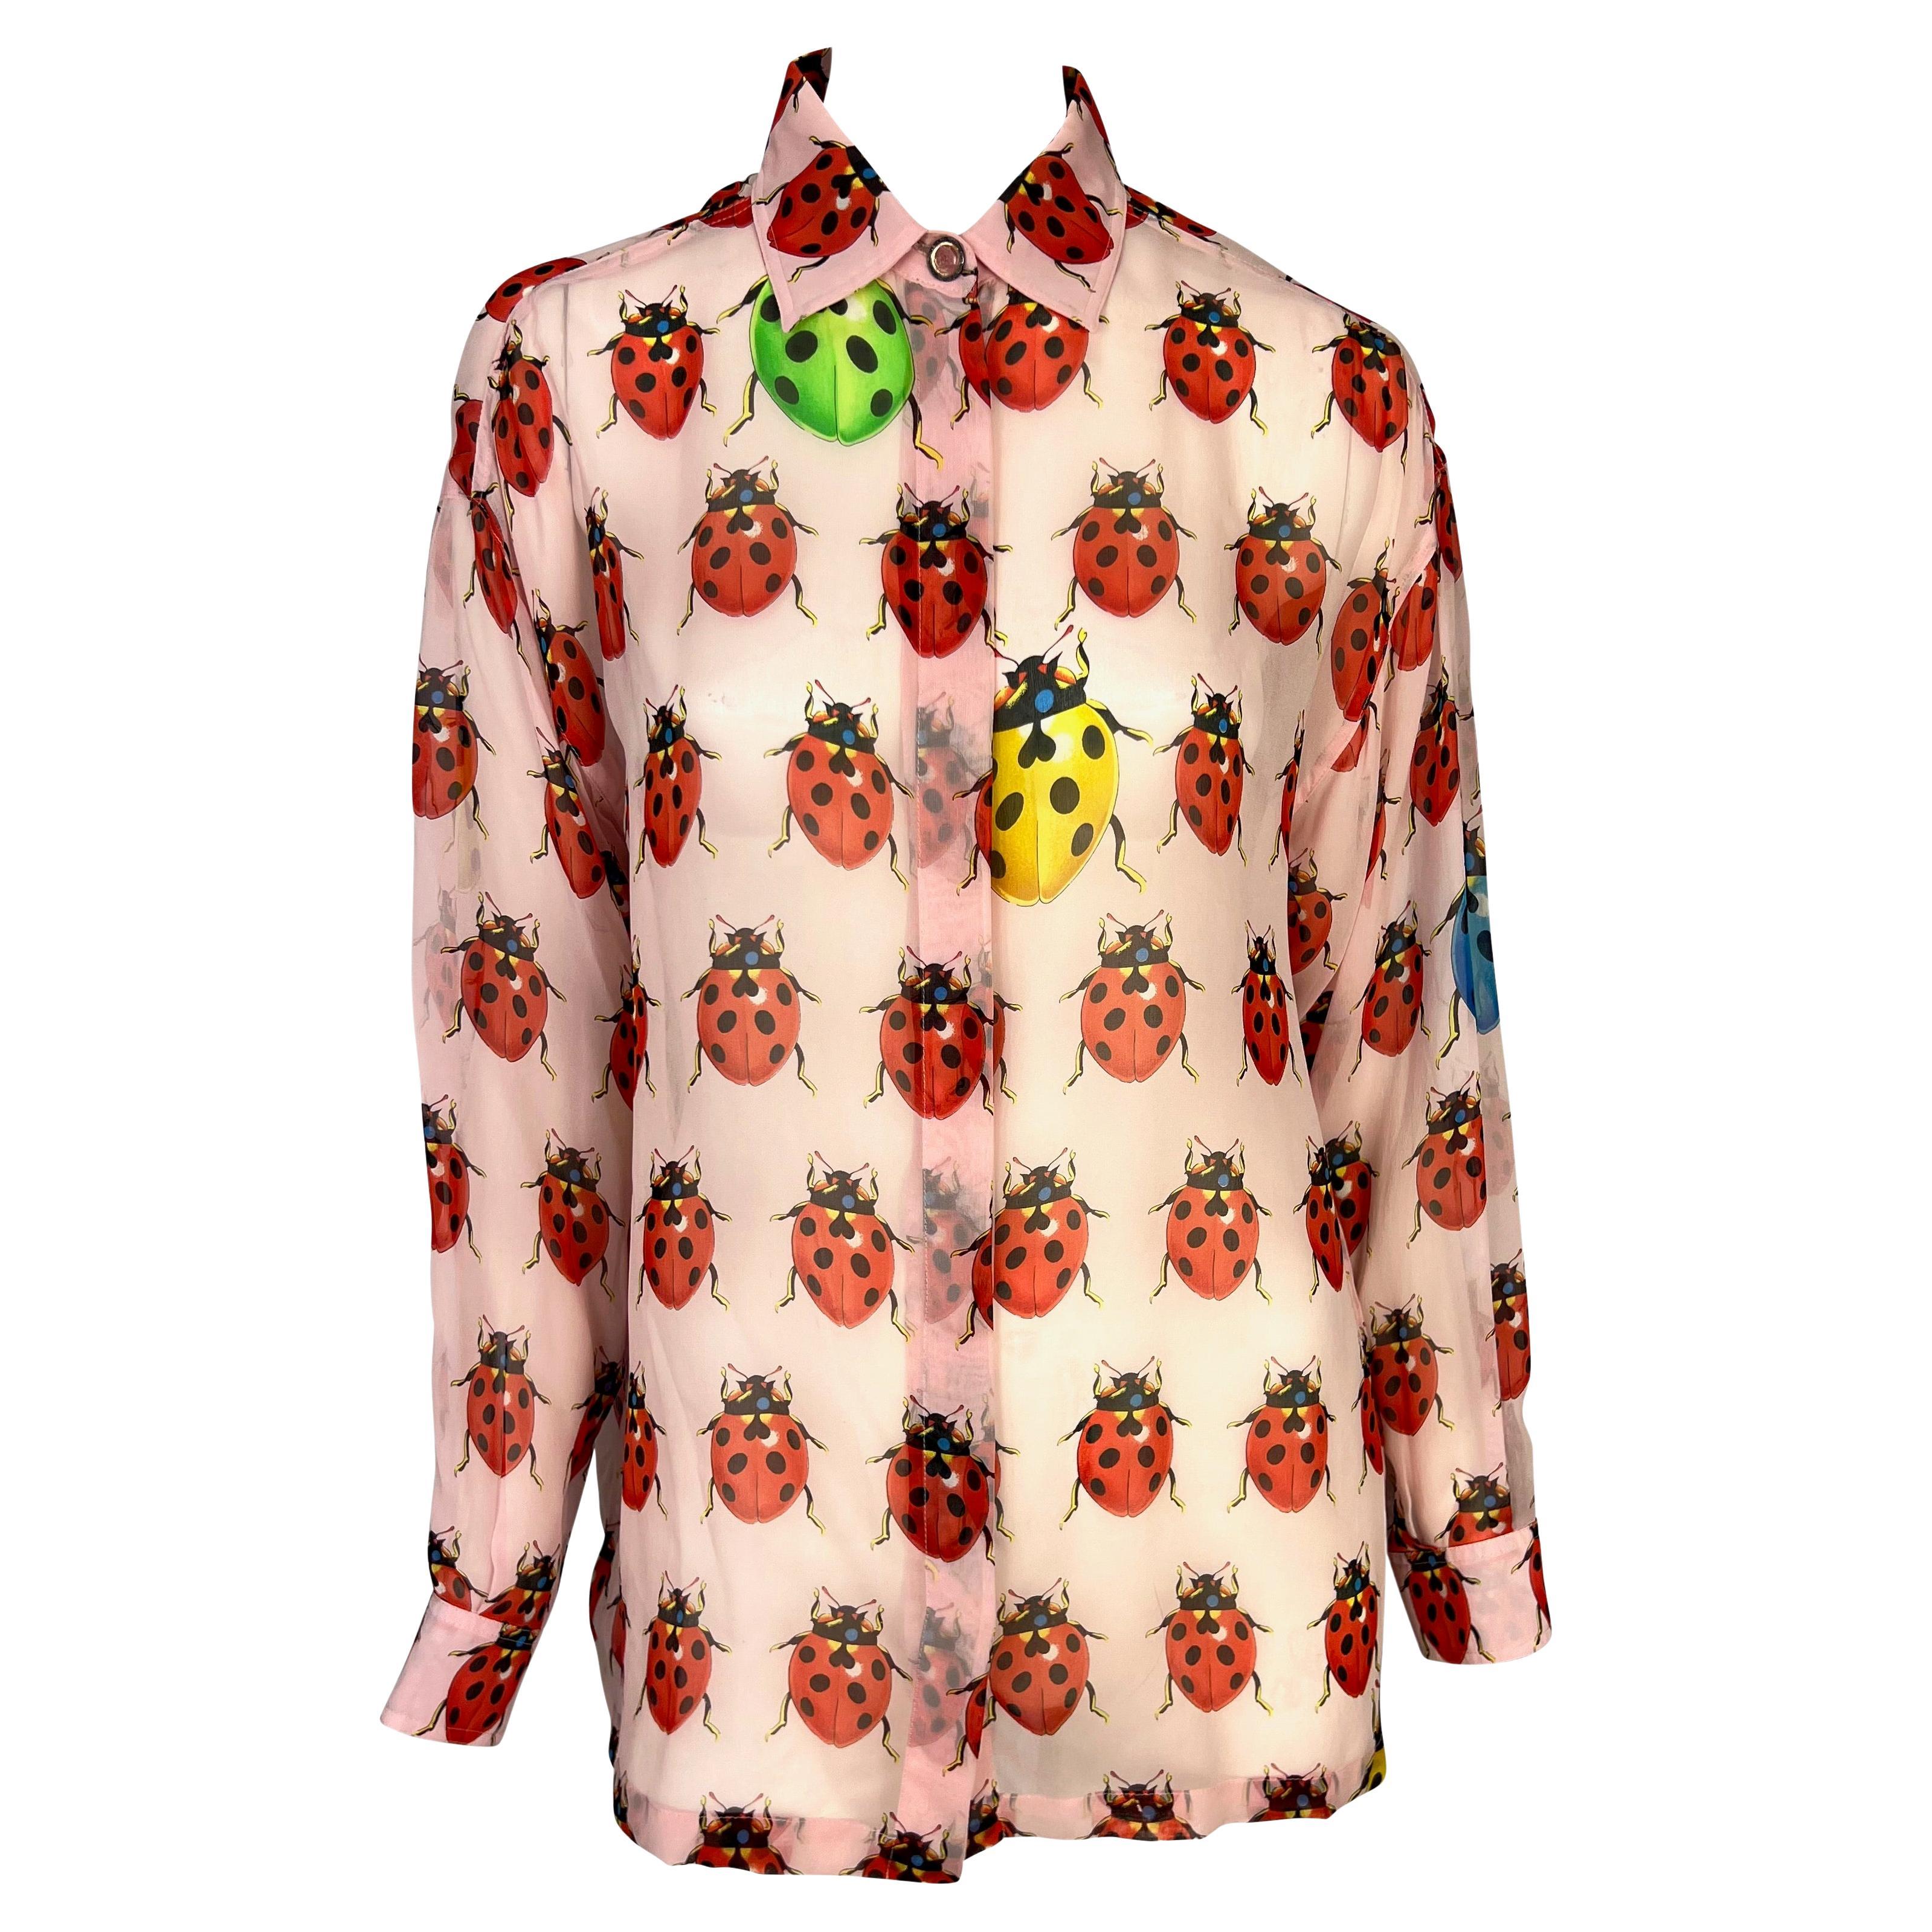 S/S 1995 Gianni Versace Couture Sheer Pink Ladybug Print Medusa Button Blouse